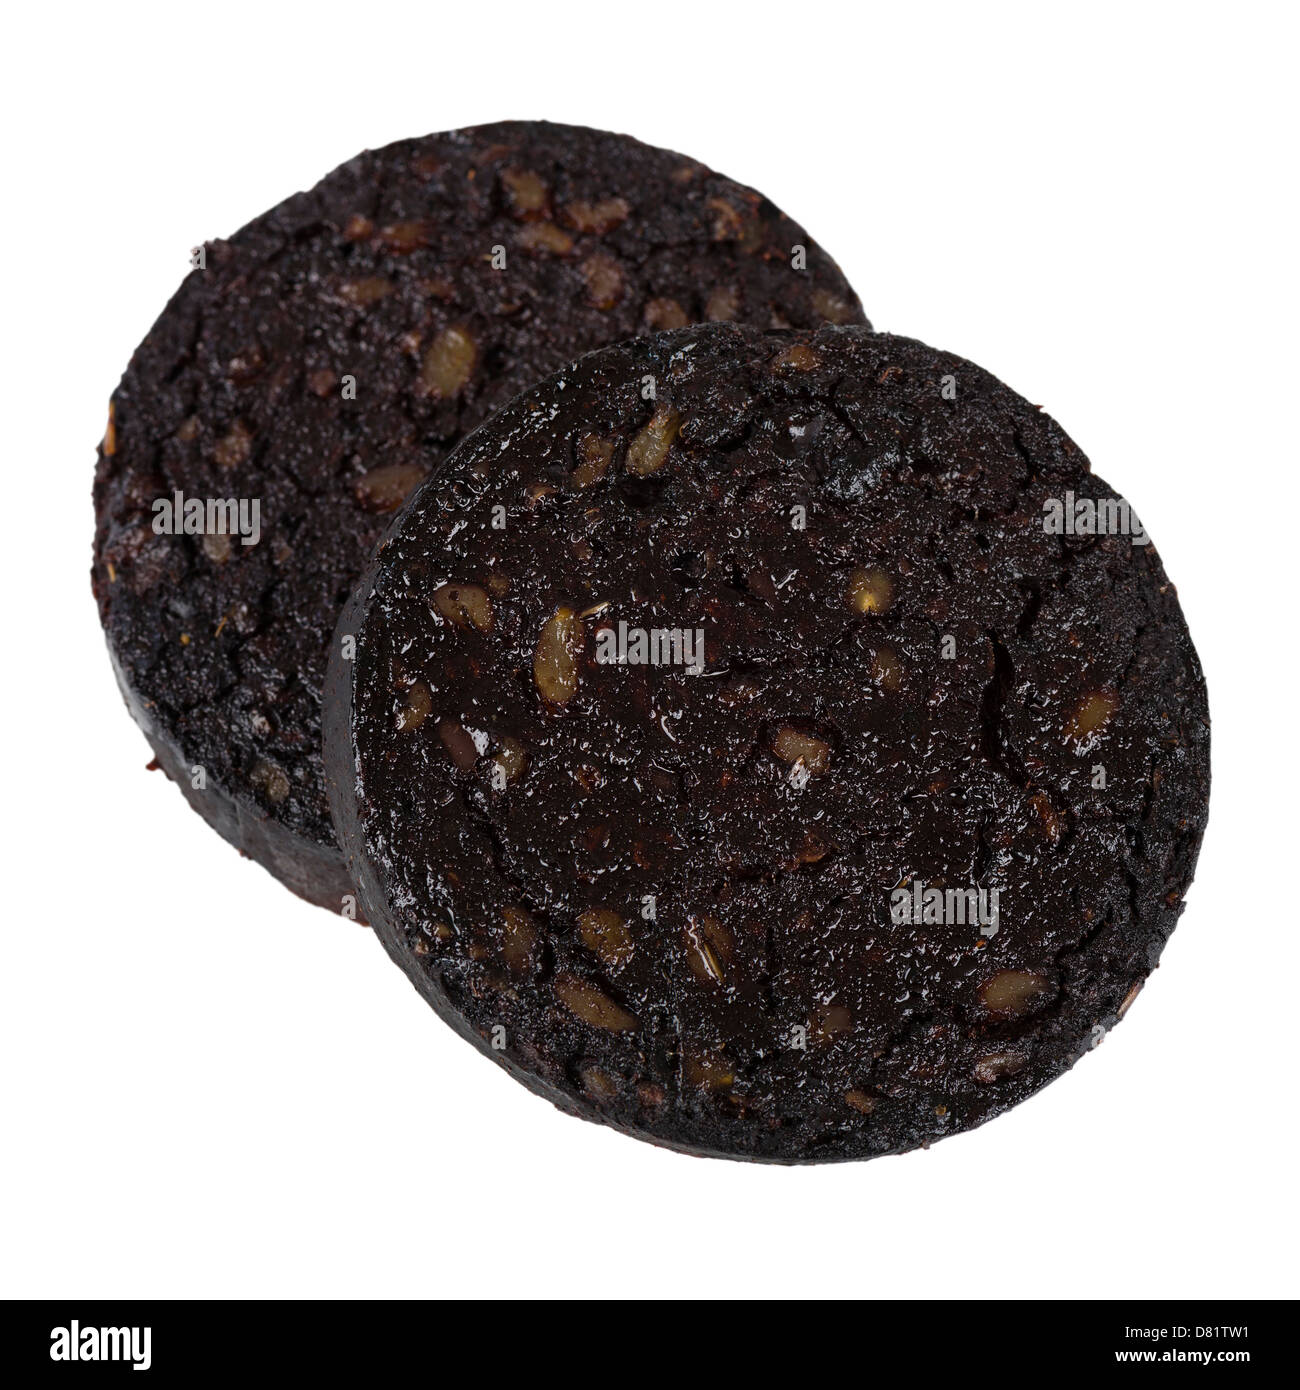 Black Pudding - Sausage made with pig's blood, oatmeal and spices isolated on a white background. Typical British cuisine. Stock Photo